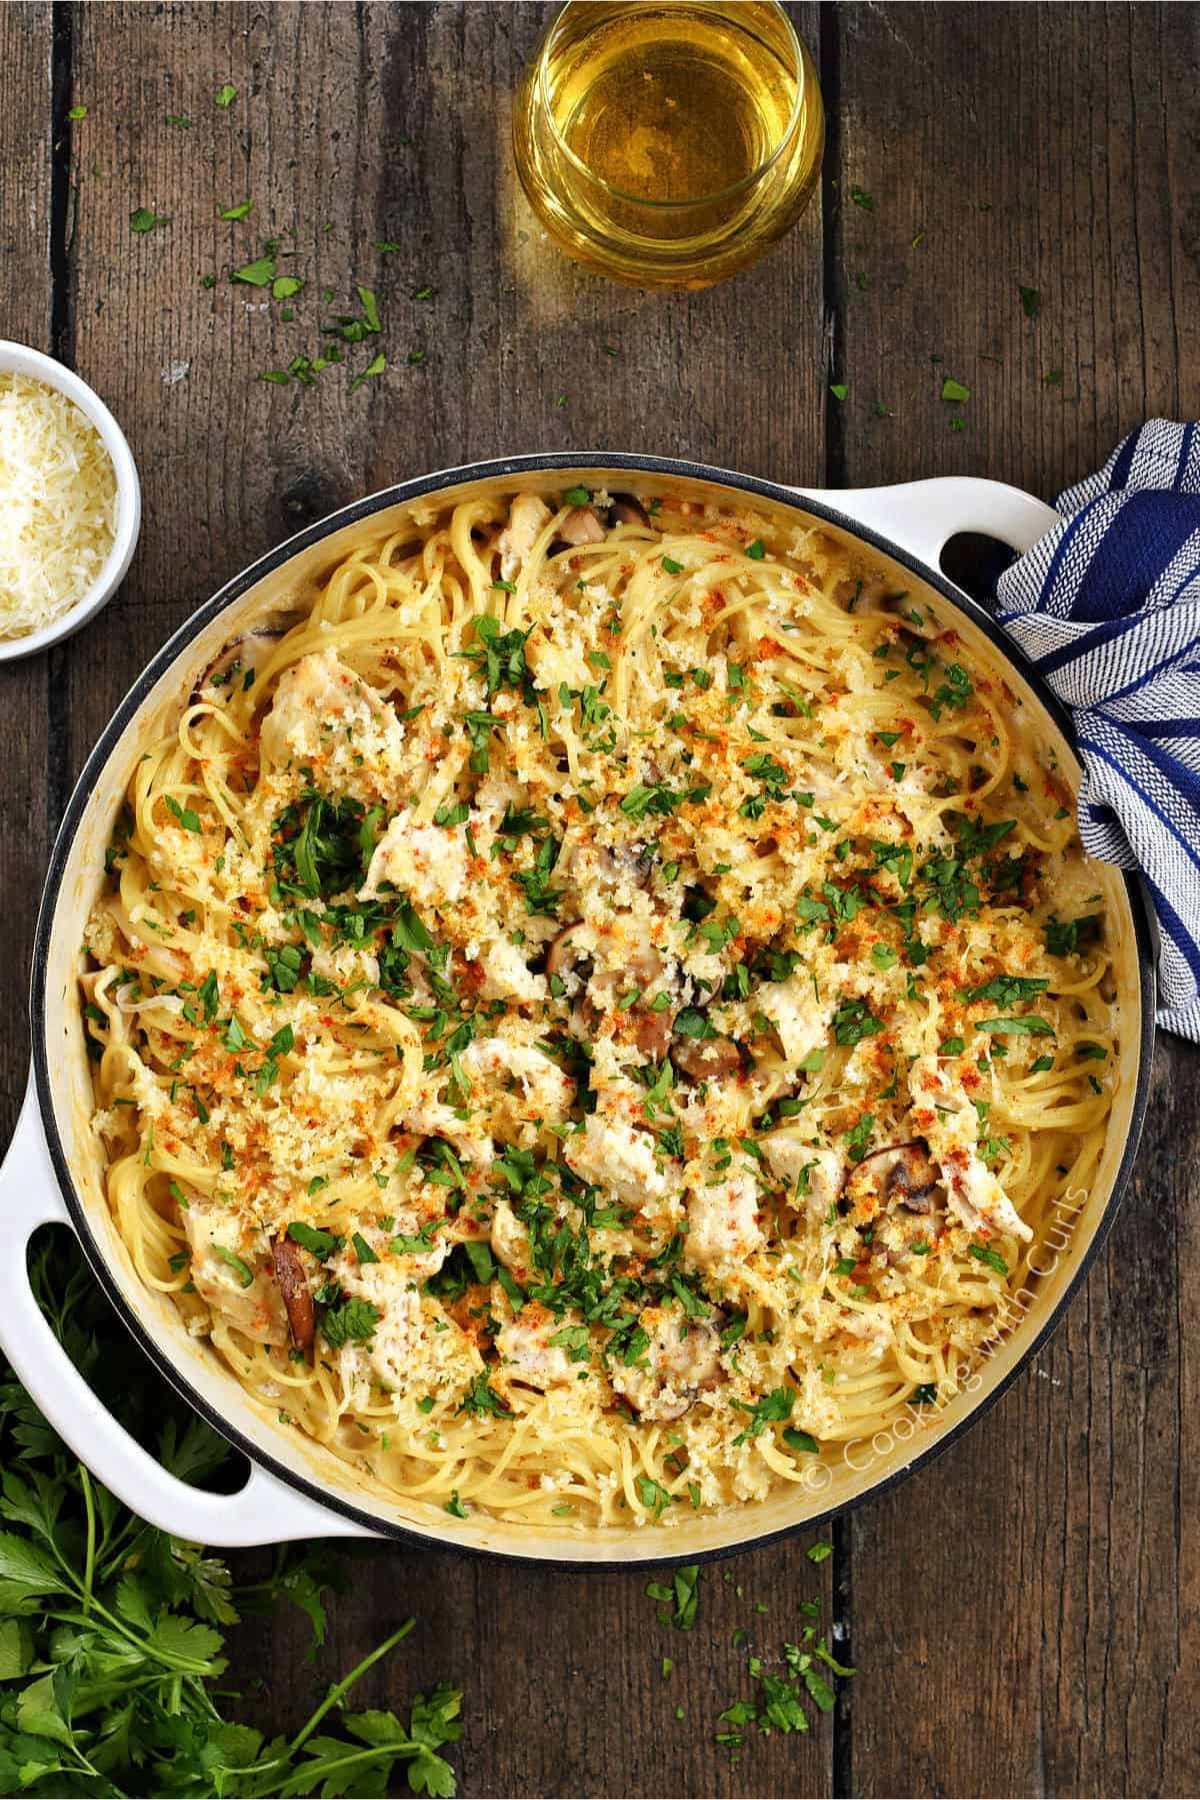 Large skillet full of spaghetti tetrazzini with chicken.